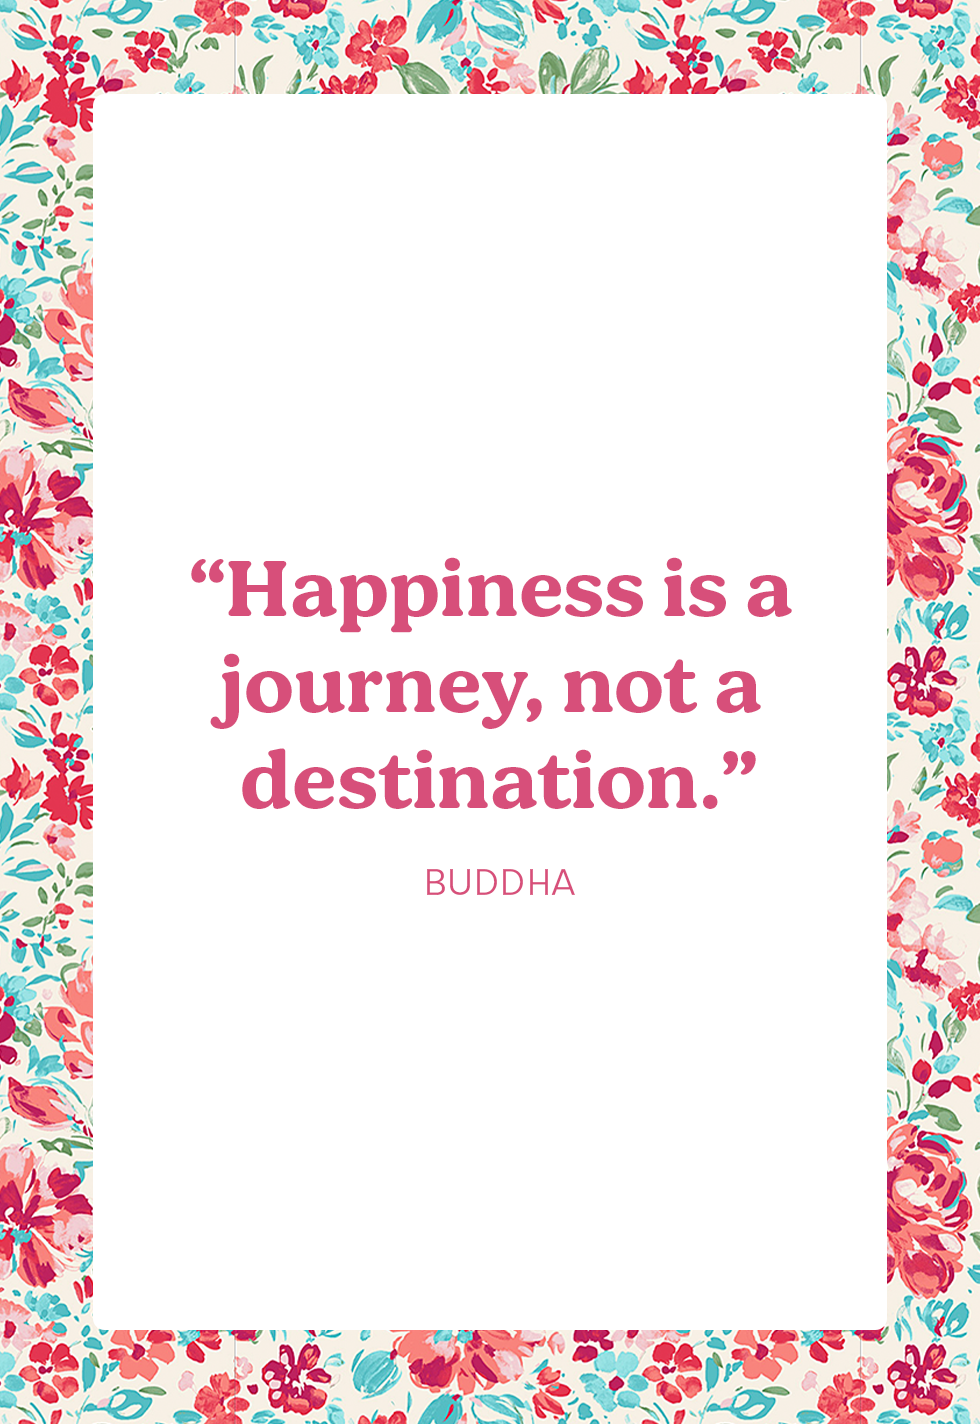 50 Best Happy Quotes - Inspiring Quotes About Happiness